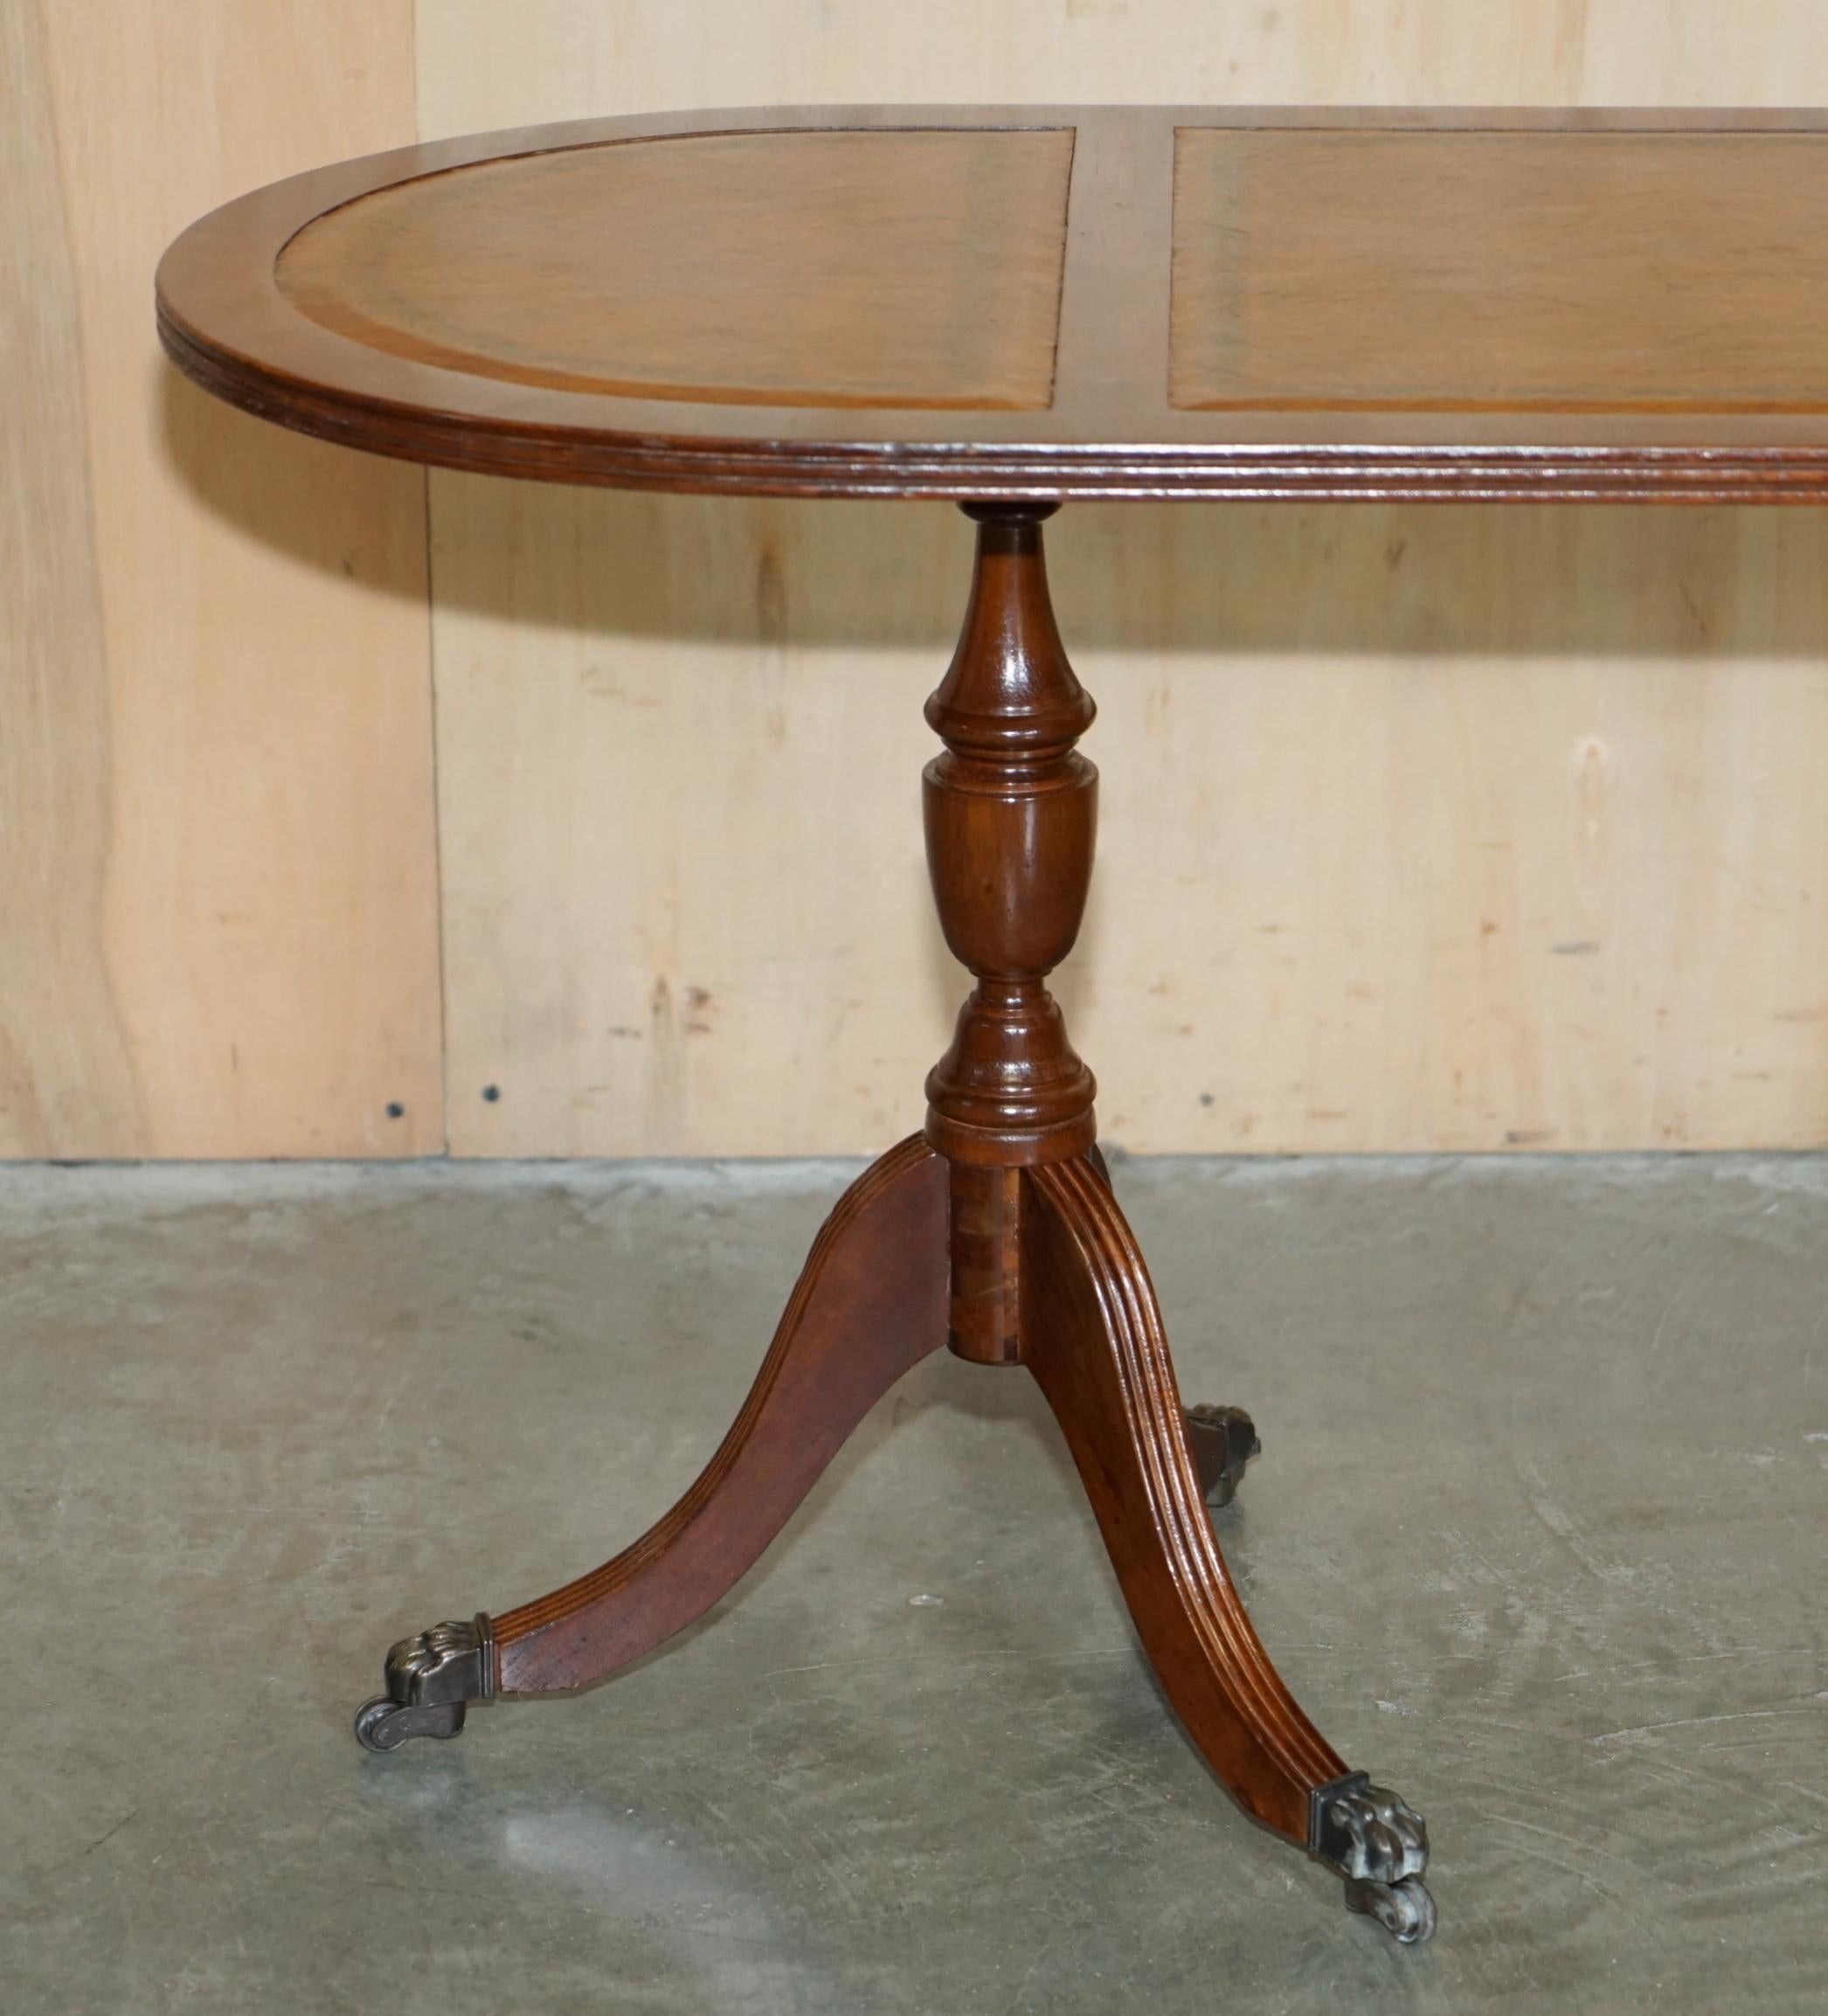 ViNTAGE HANDDYED AND AGED BROWN LEATHER OVAL COFFEE-TABLE MIT LION CASTORS (Englisch) im Angebot